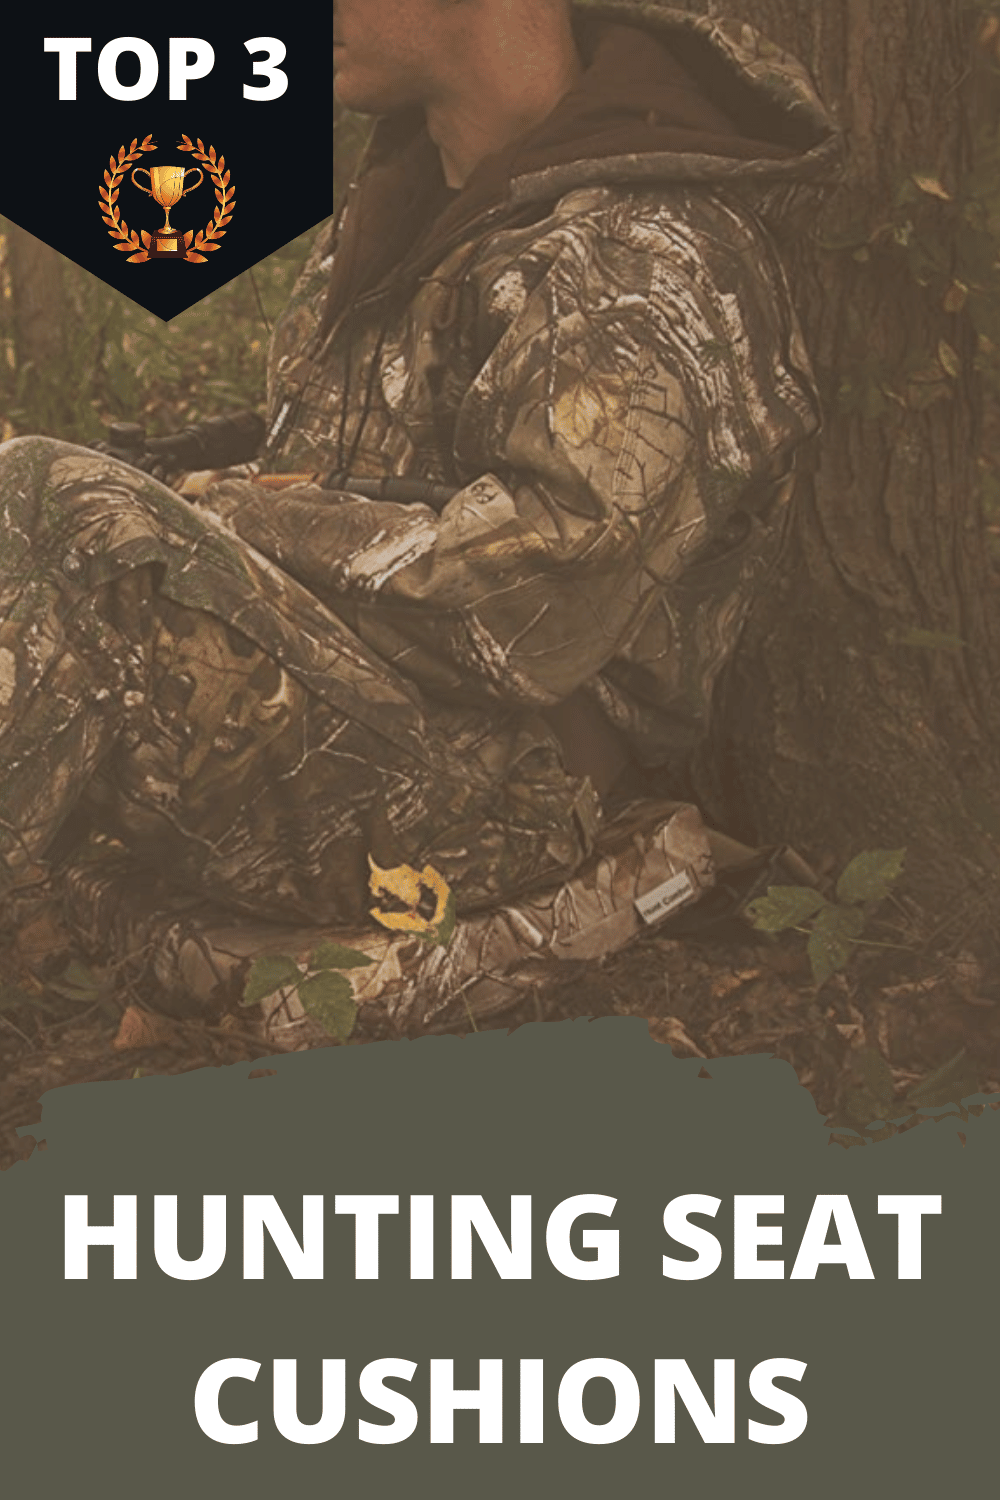 3 Best Hunting Seat Cushion Options (Buying Guide)